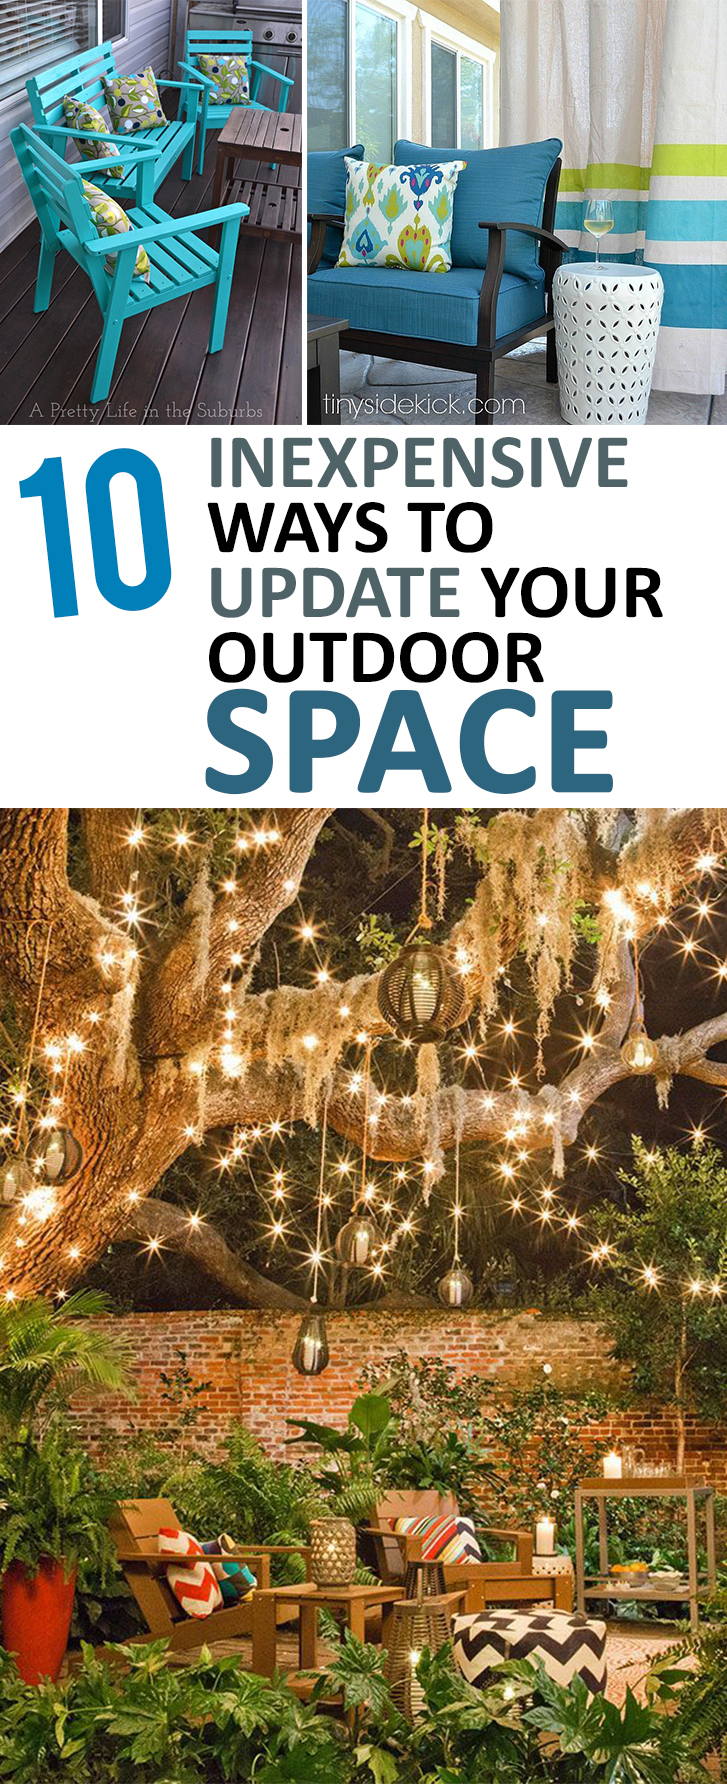 10 Inexpensive Ways to Update Your Outdoor Space